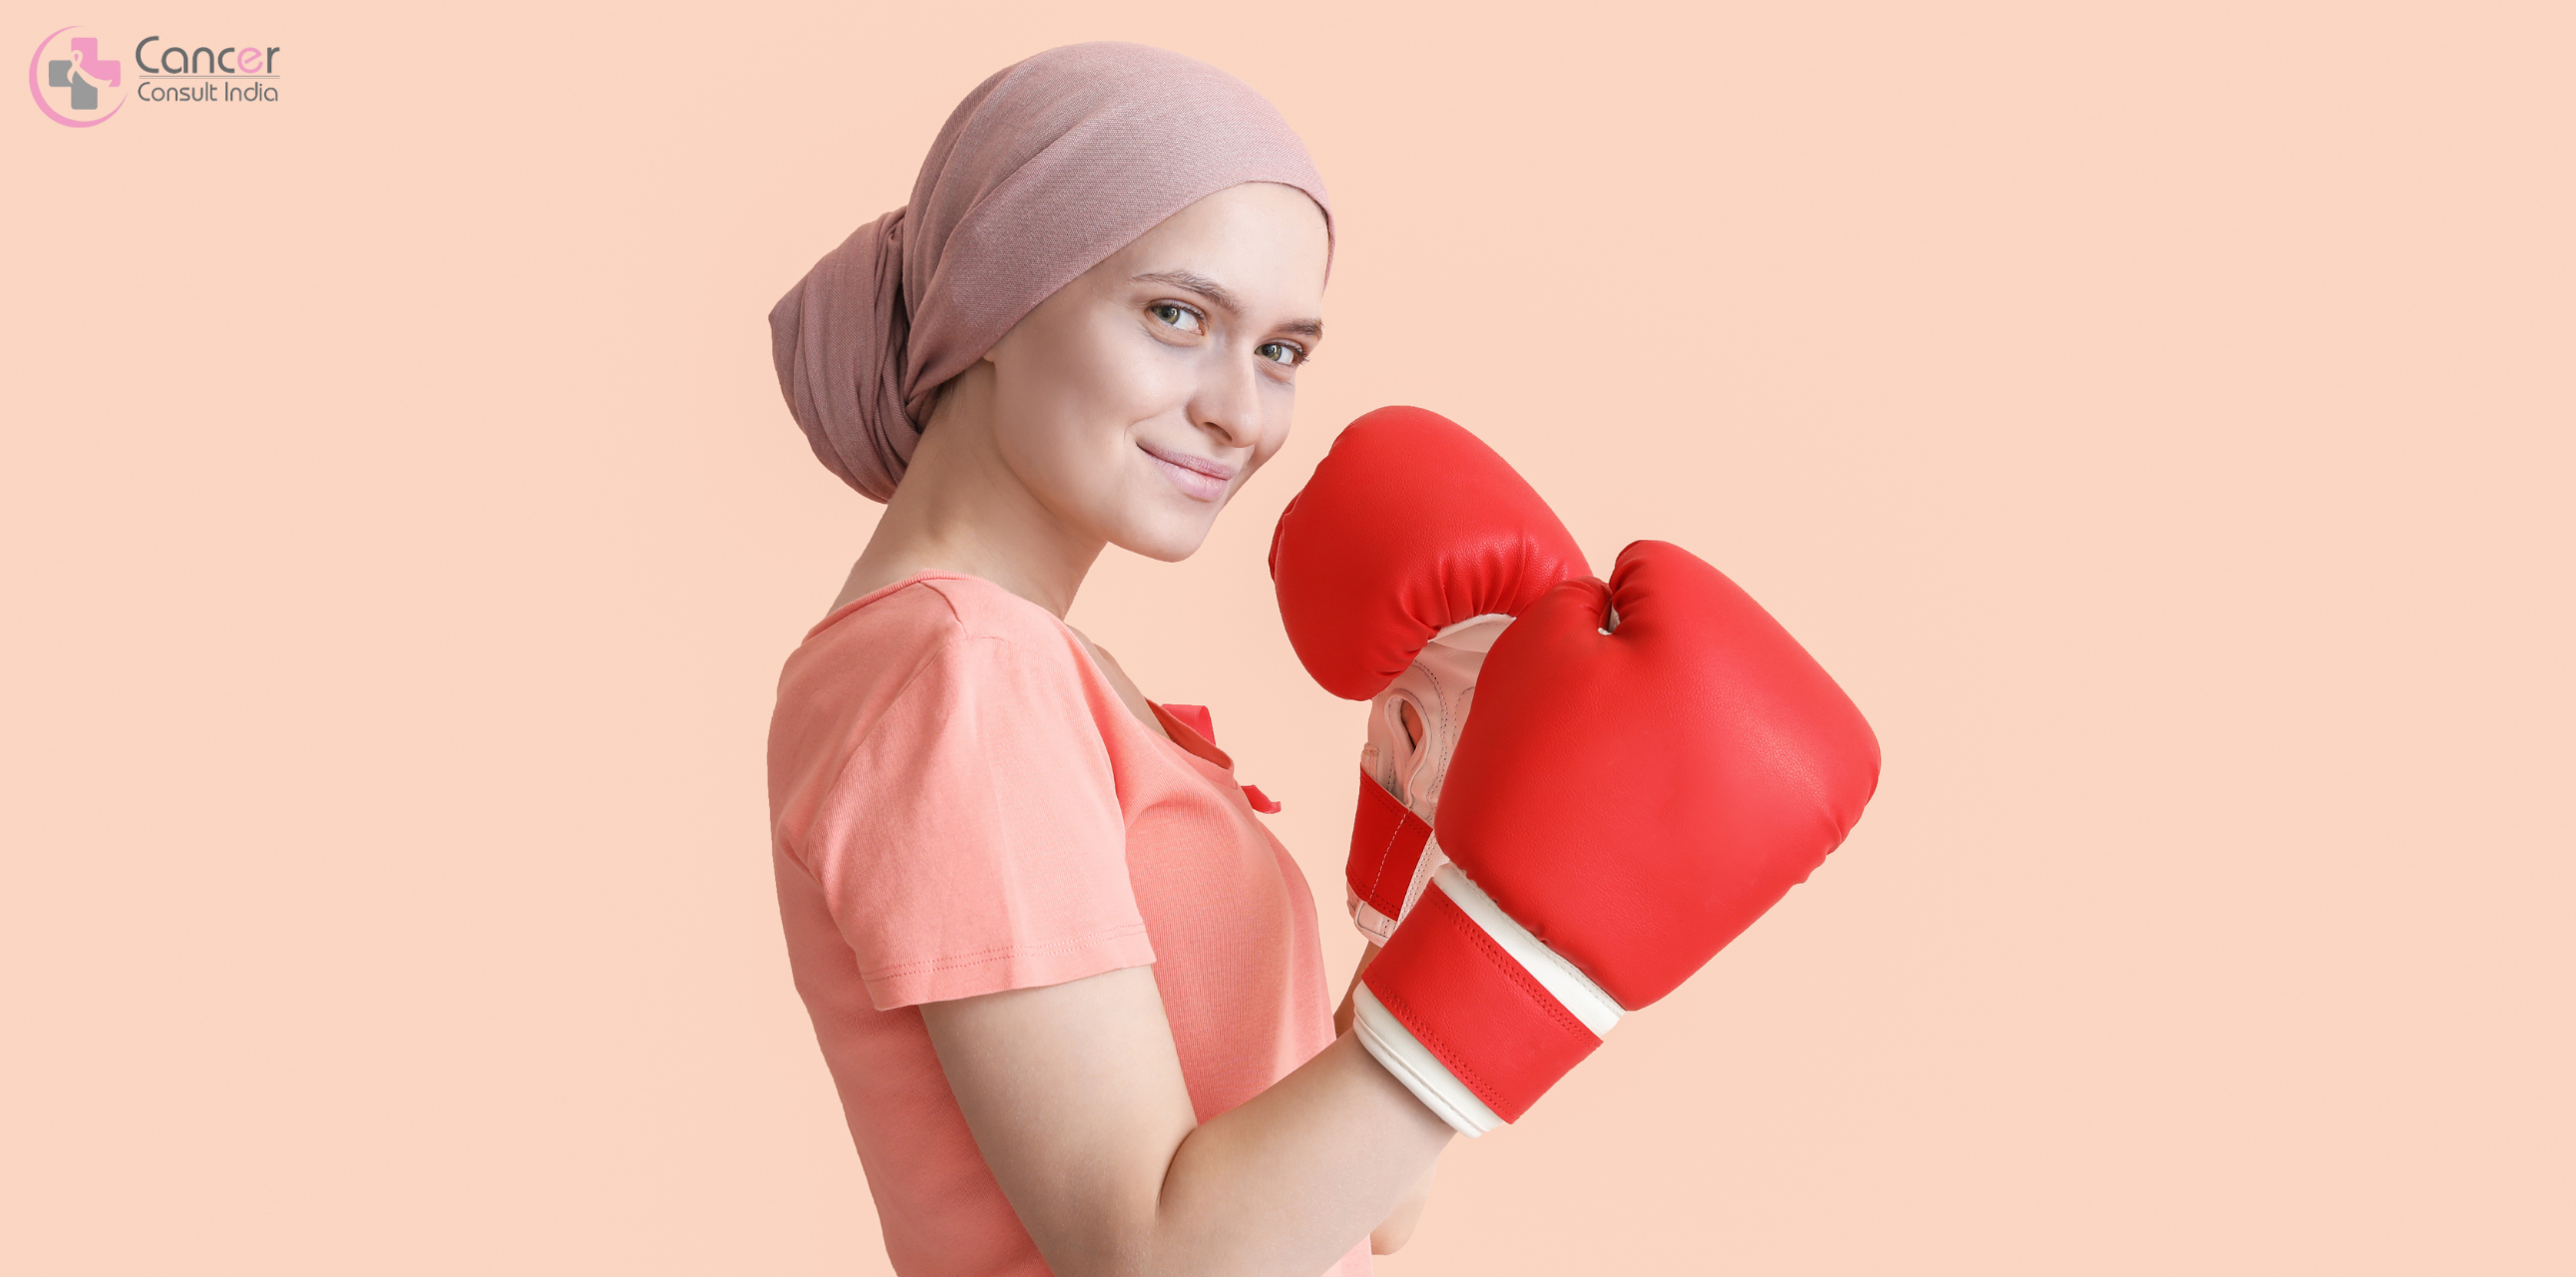 Empower Your Fight Against Cancer: Strategies for Taking Control of Your Journey